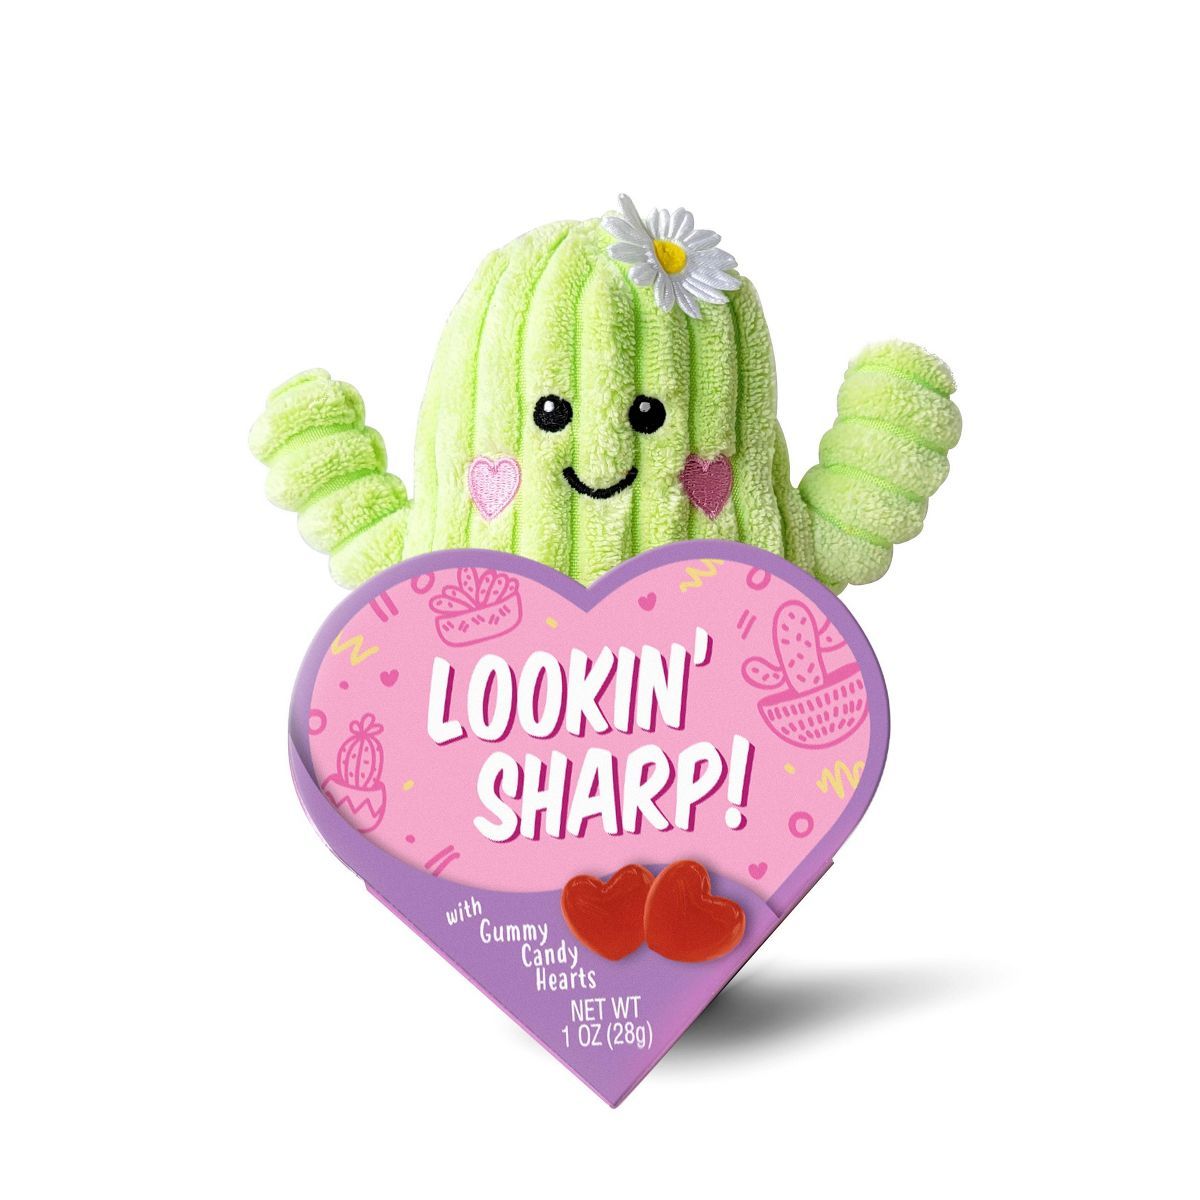 Cactus Valentine's Looking Sharp Date Night Plush with Gummy Candy Hearts - 1oz | Target